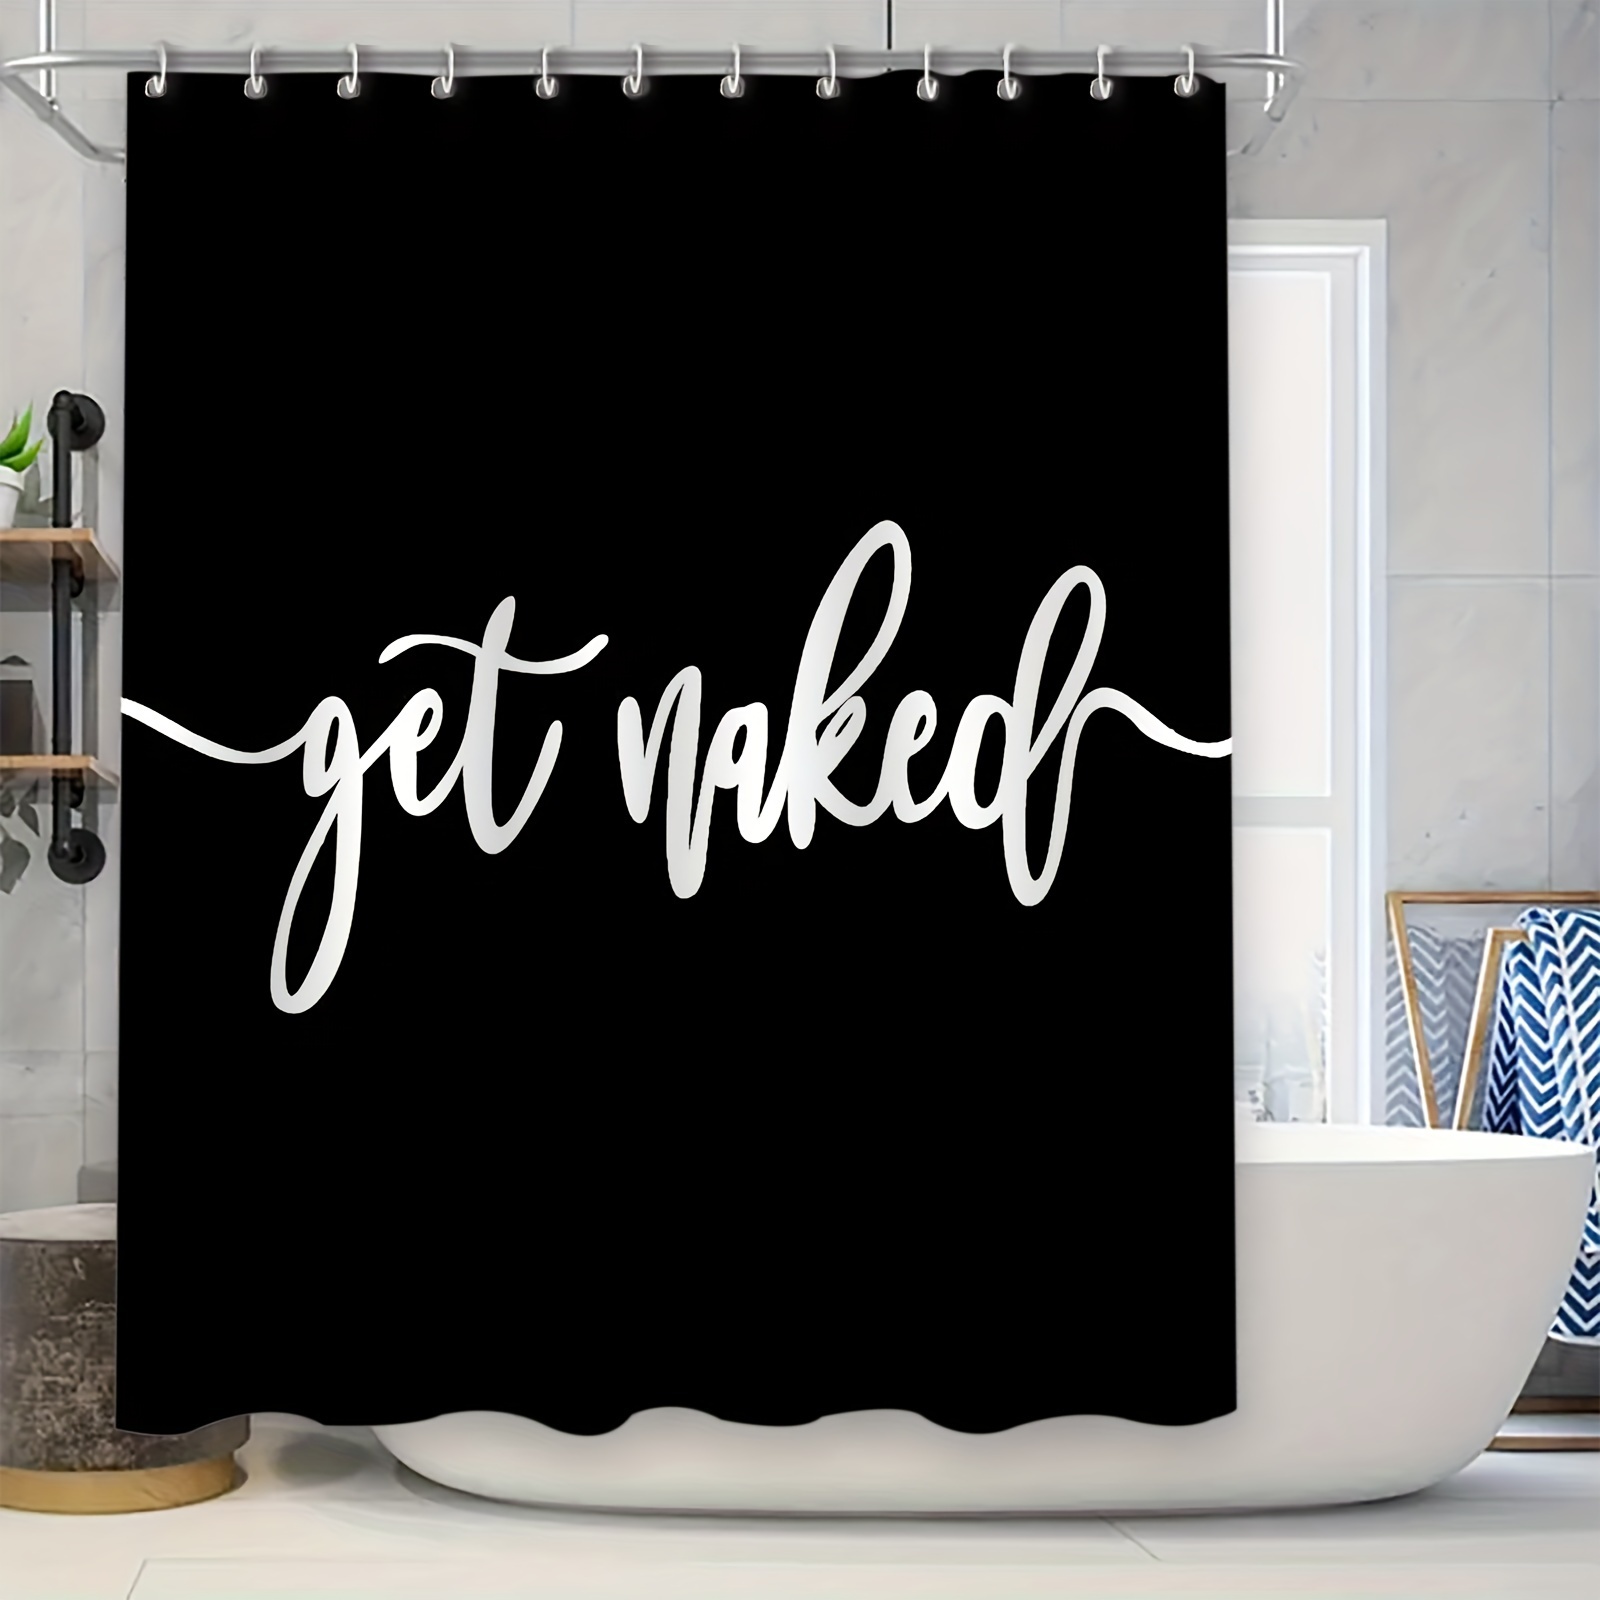 

1pc Get Naked Pattern Shower Curtain With Hooks, Waterproof Bathroom Partition Curtain, Bathroom Accessories, Home Decor